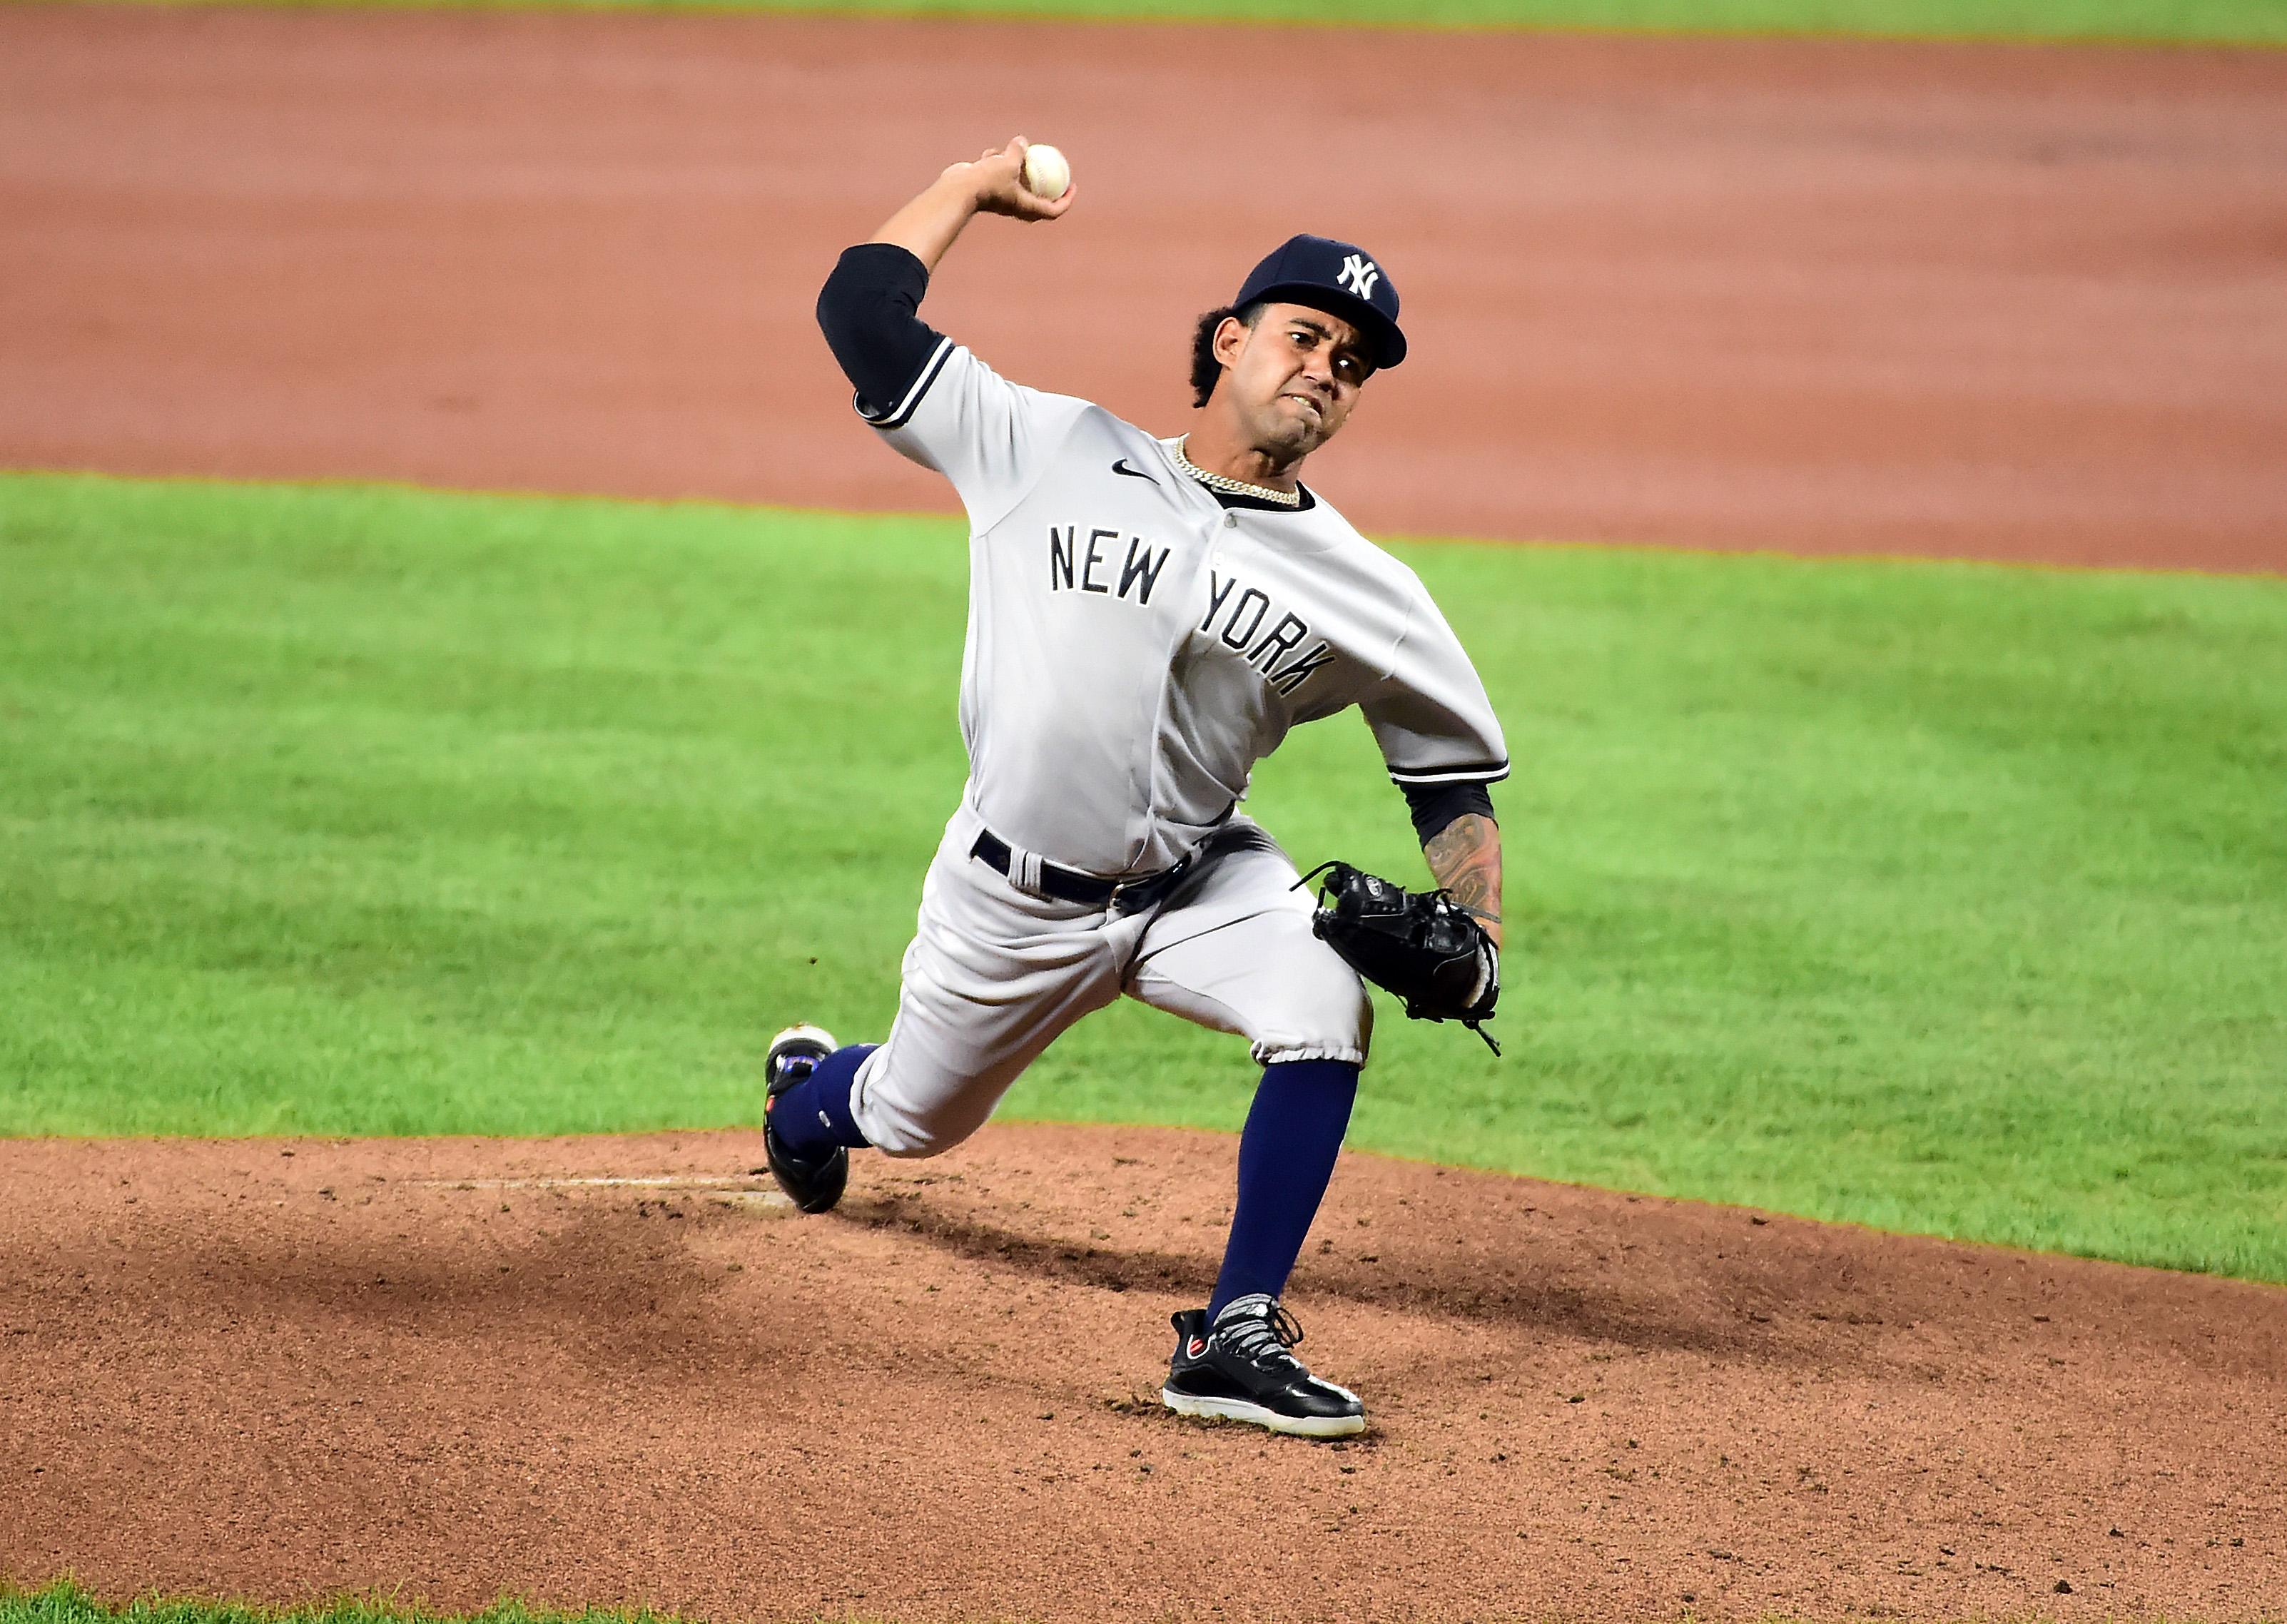 Sep 4, 2020; Baltimore, Maryland, USA; New York Yankees pitcher Deivi Garcia (83) throws a pitch in the first inning against the Baltimore Orioles at Oriole Park at Camden Yards. / Evan Habeeb-USA TODAY Sports